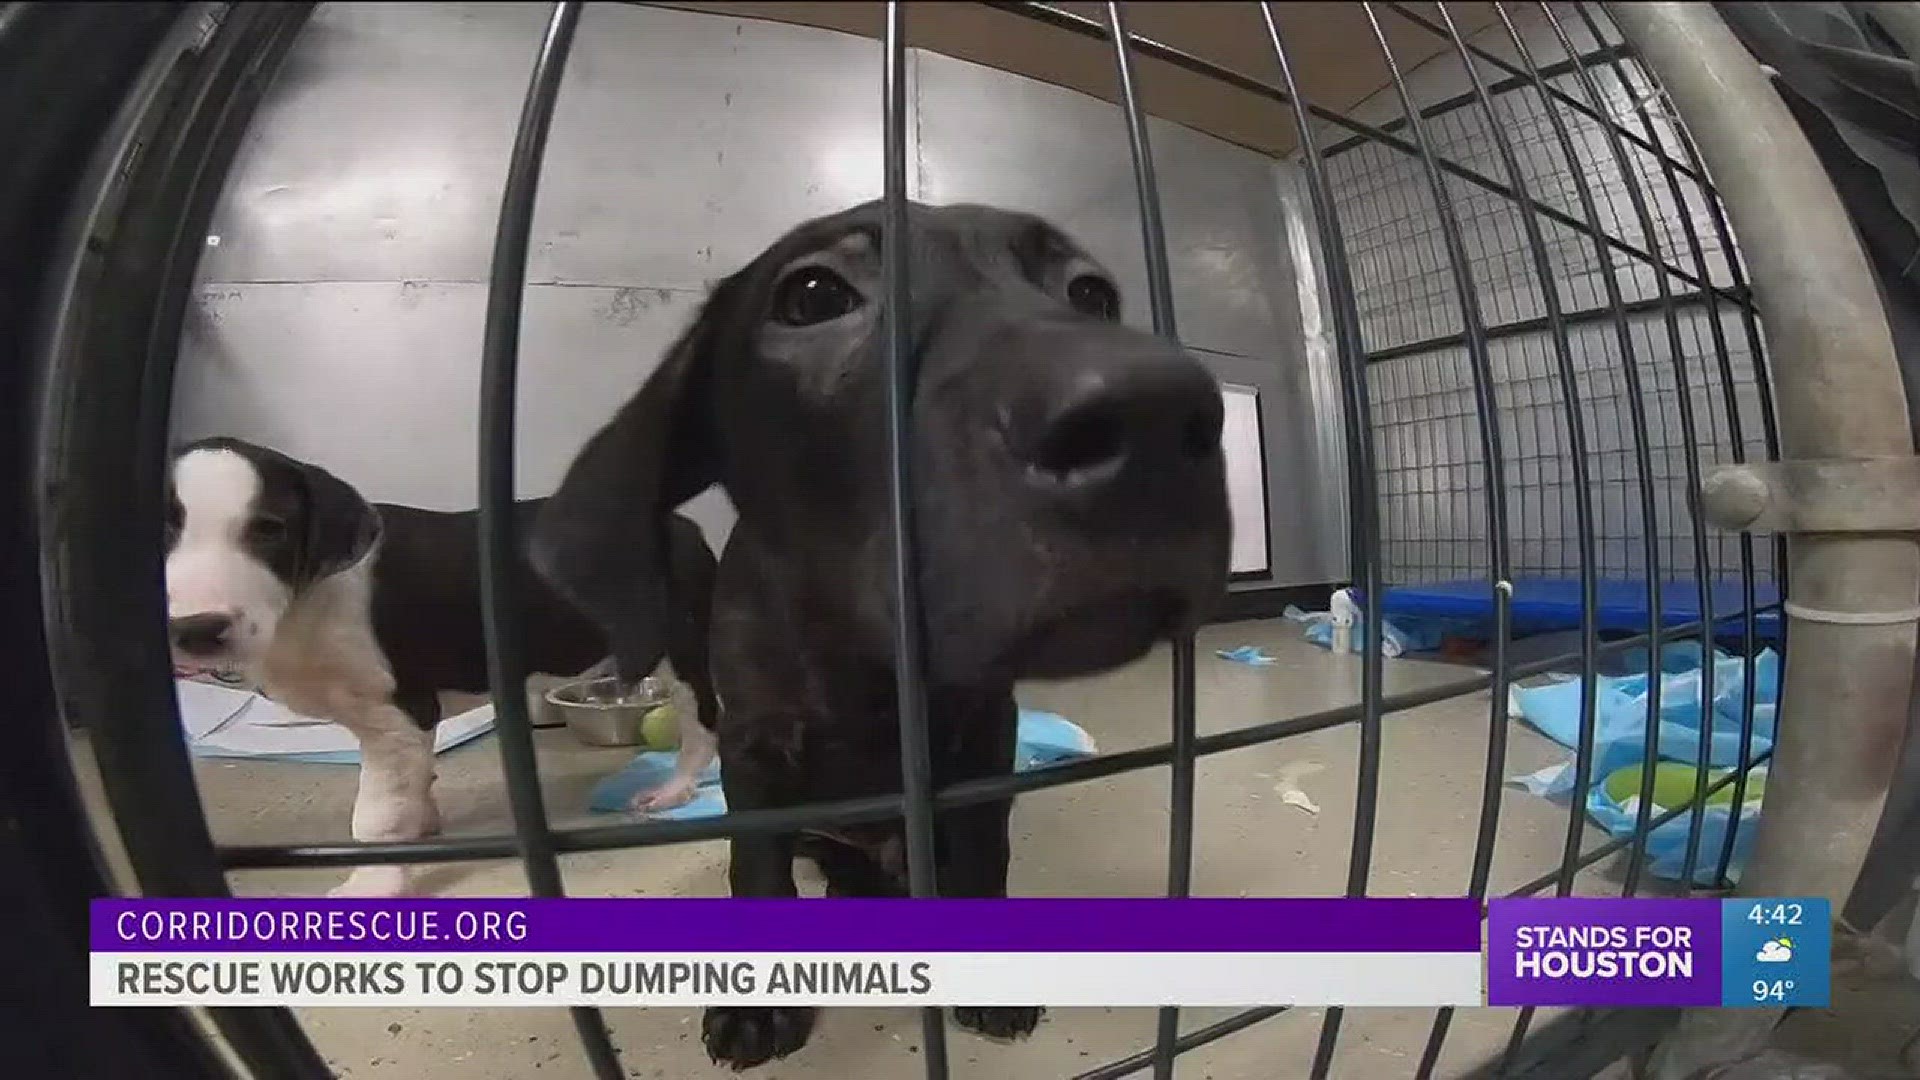 Corridor Rescue has saved countless animals through the year but now they're the ones who need help. They need security cameras to help deter people from dumping animals outside their shelter. If you can help, please email web@khou.com